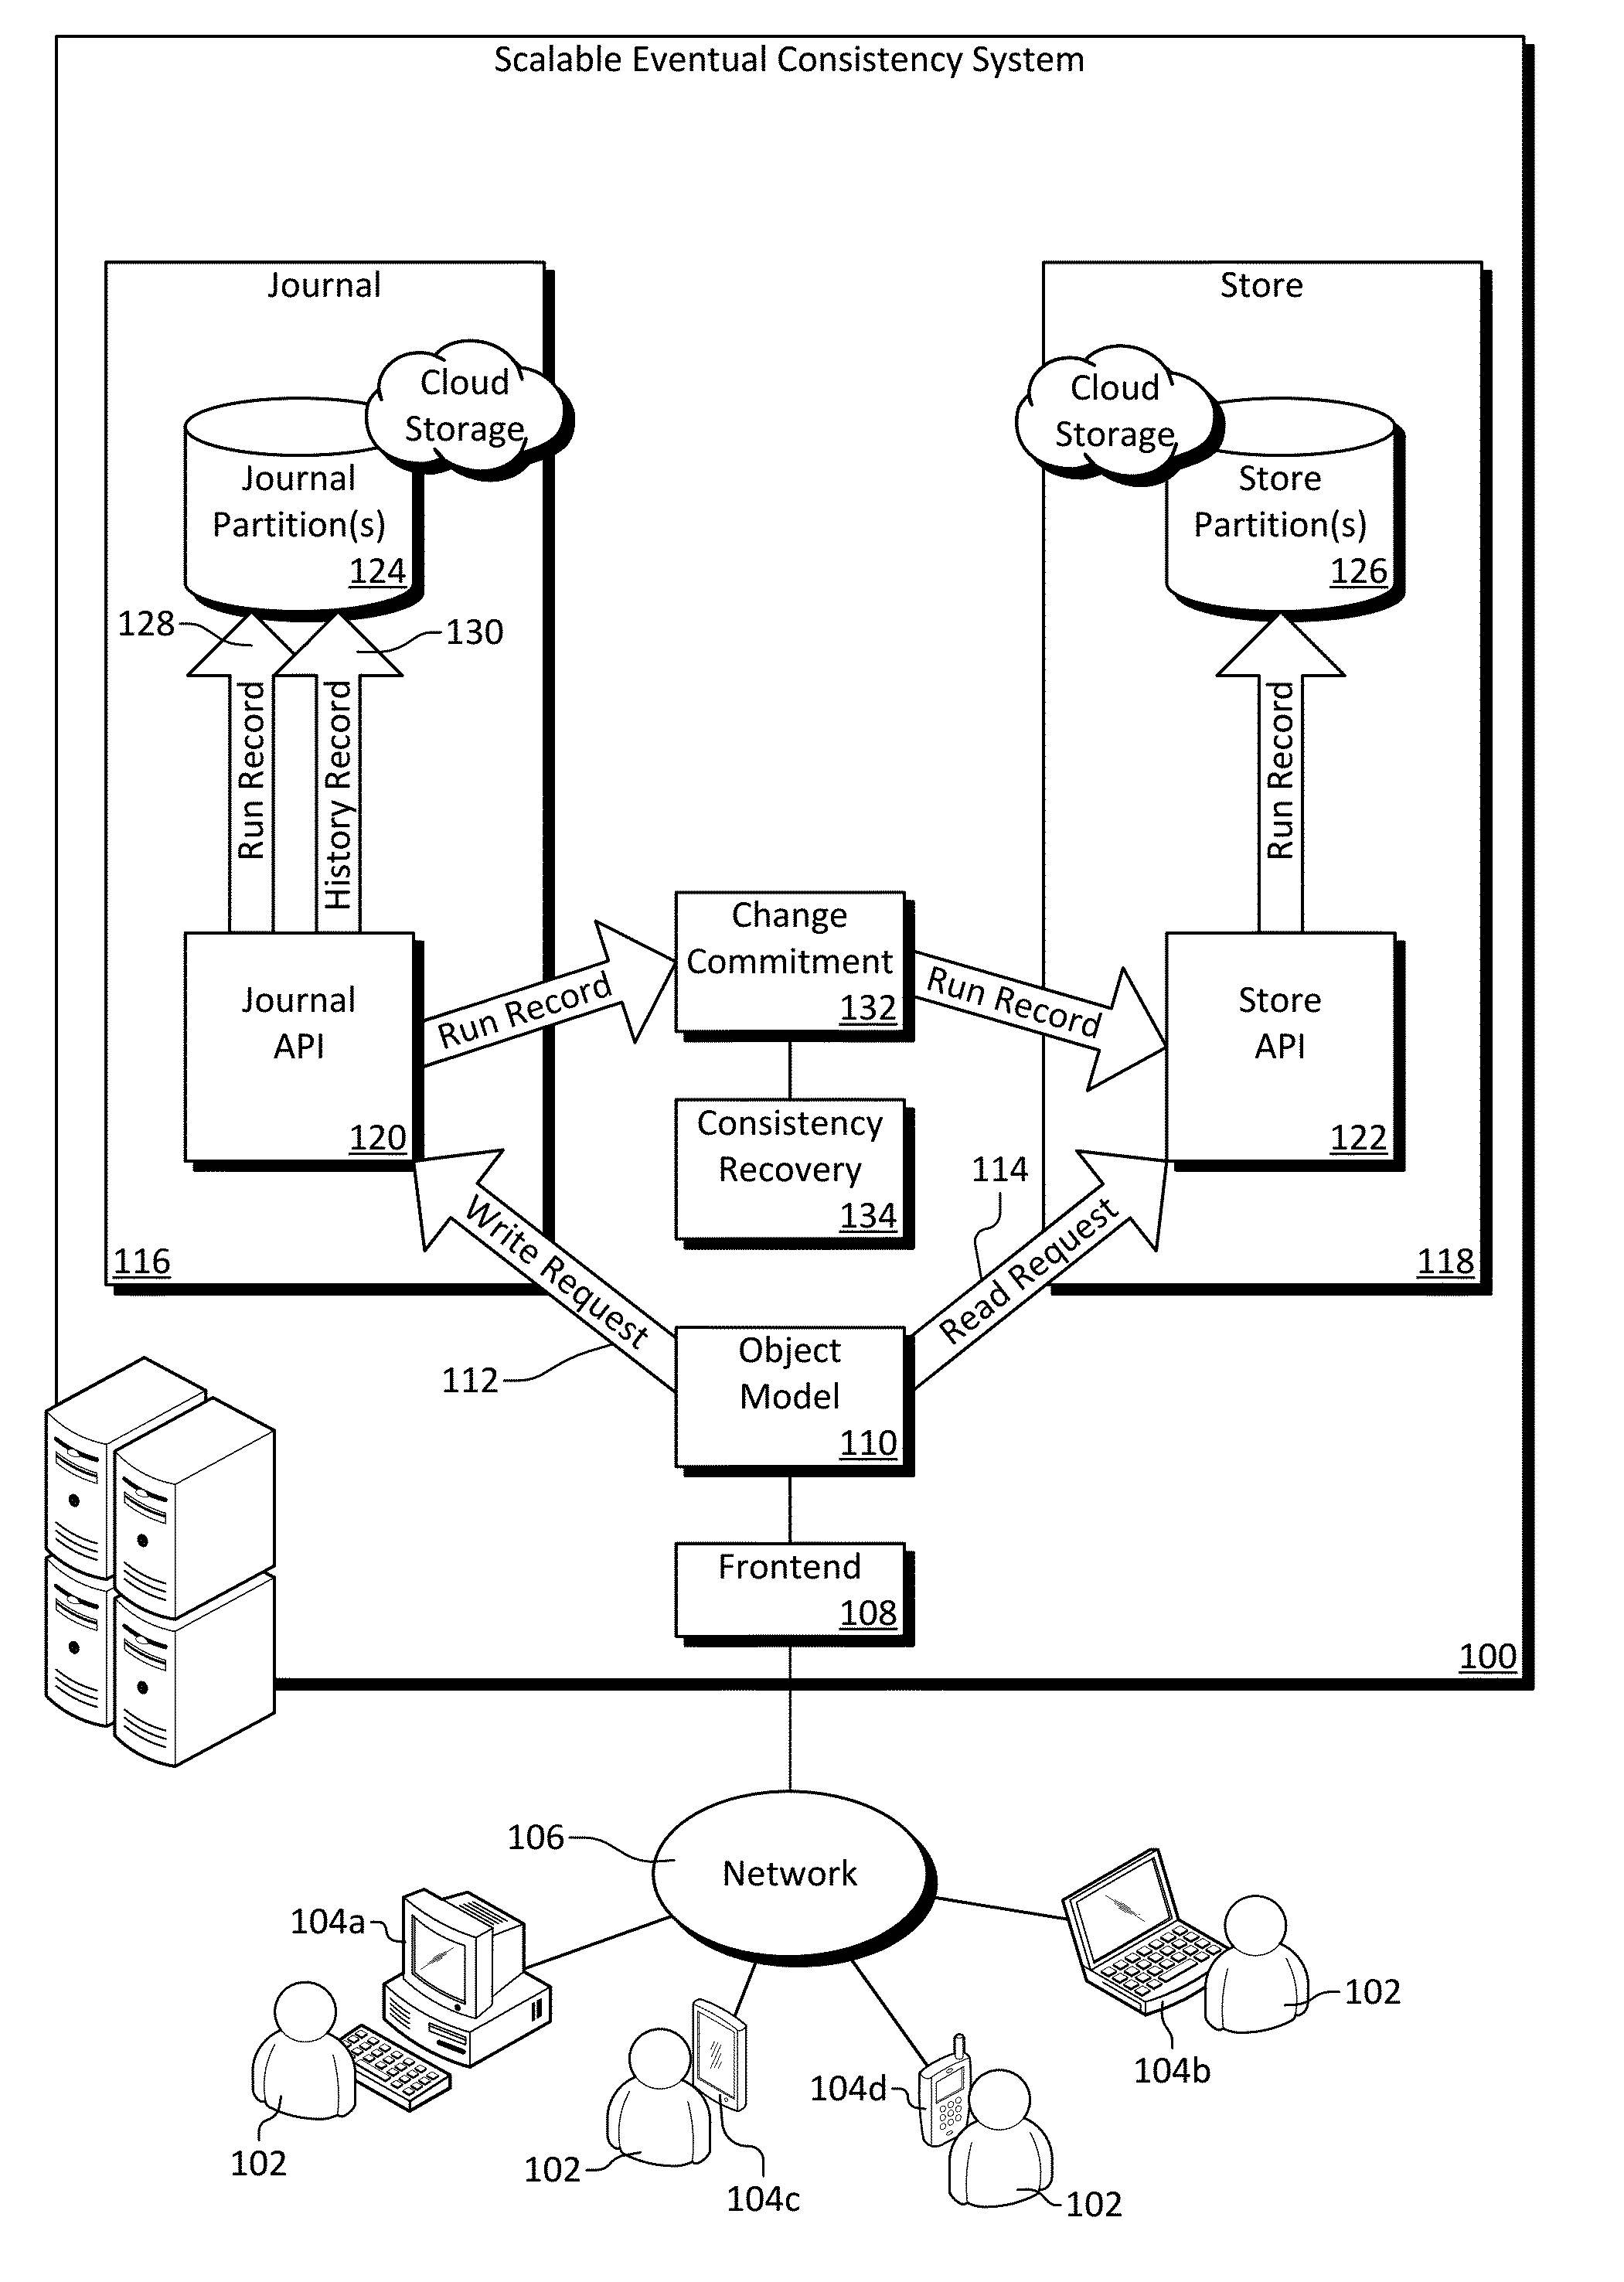 Scalable eventual consistency system using logical document journaling